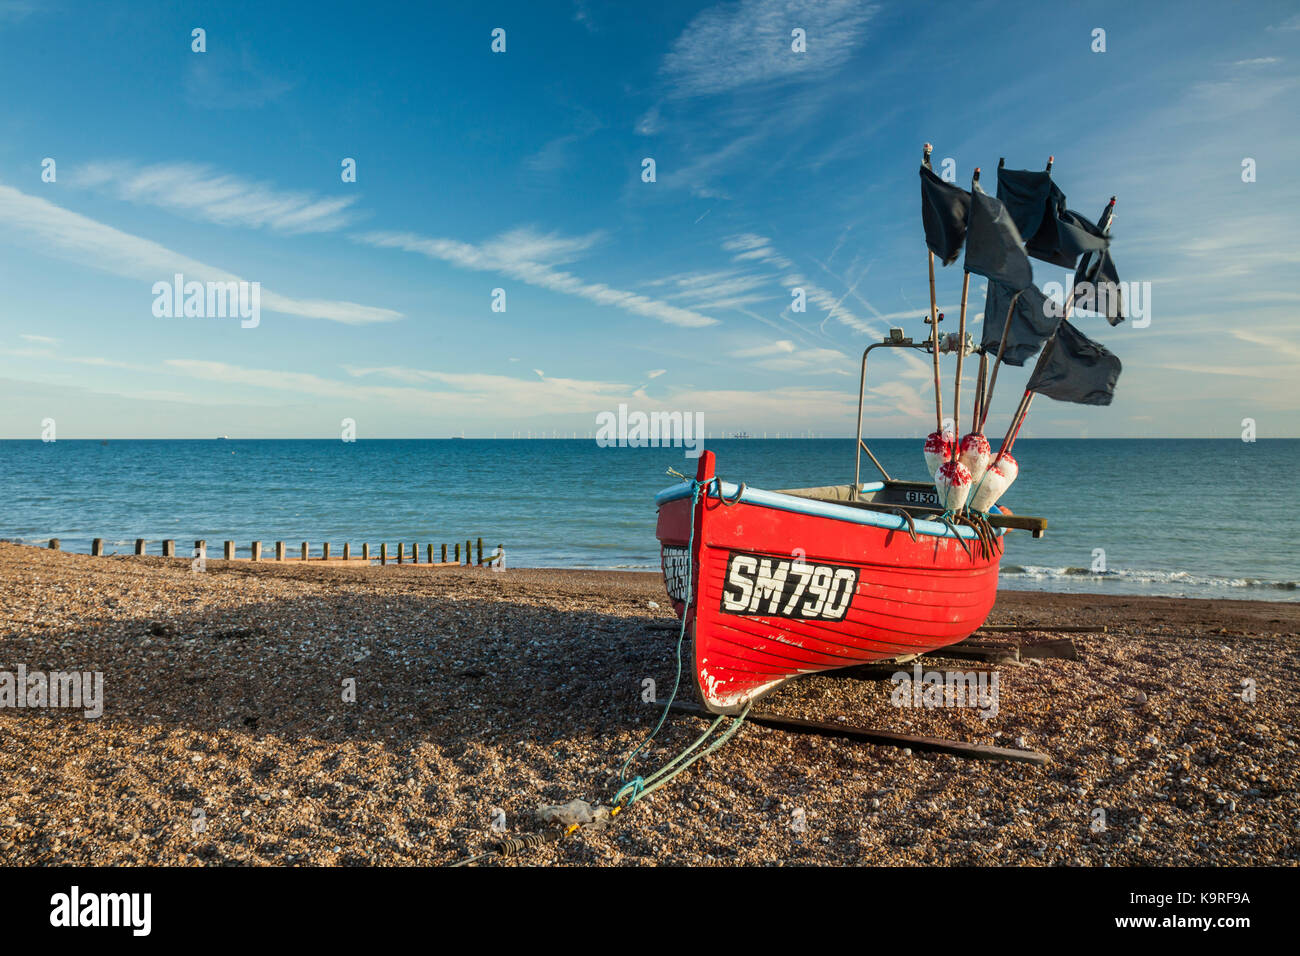 Fishing boat on Worthing beach, West Sussex, England. Stock Photo